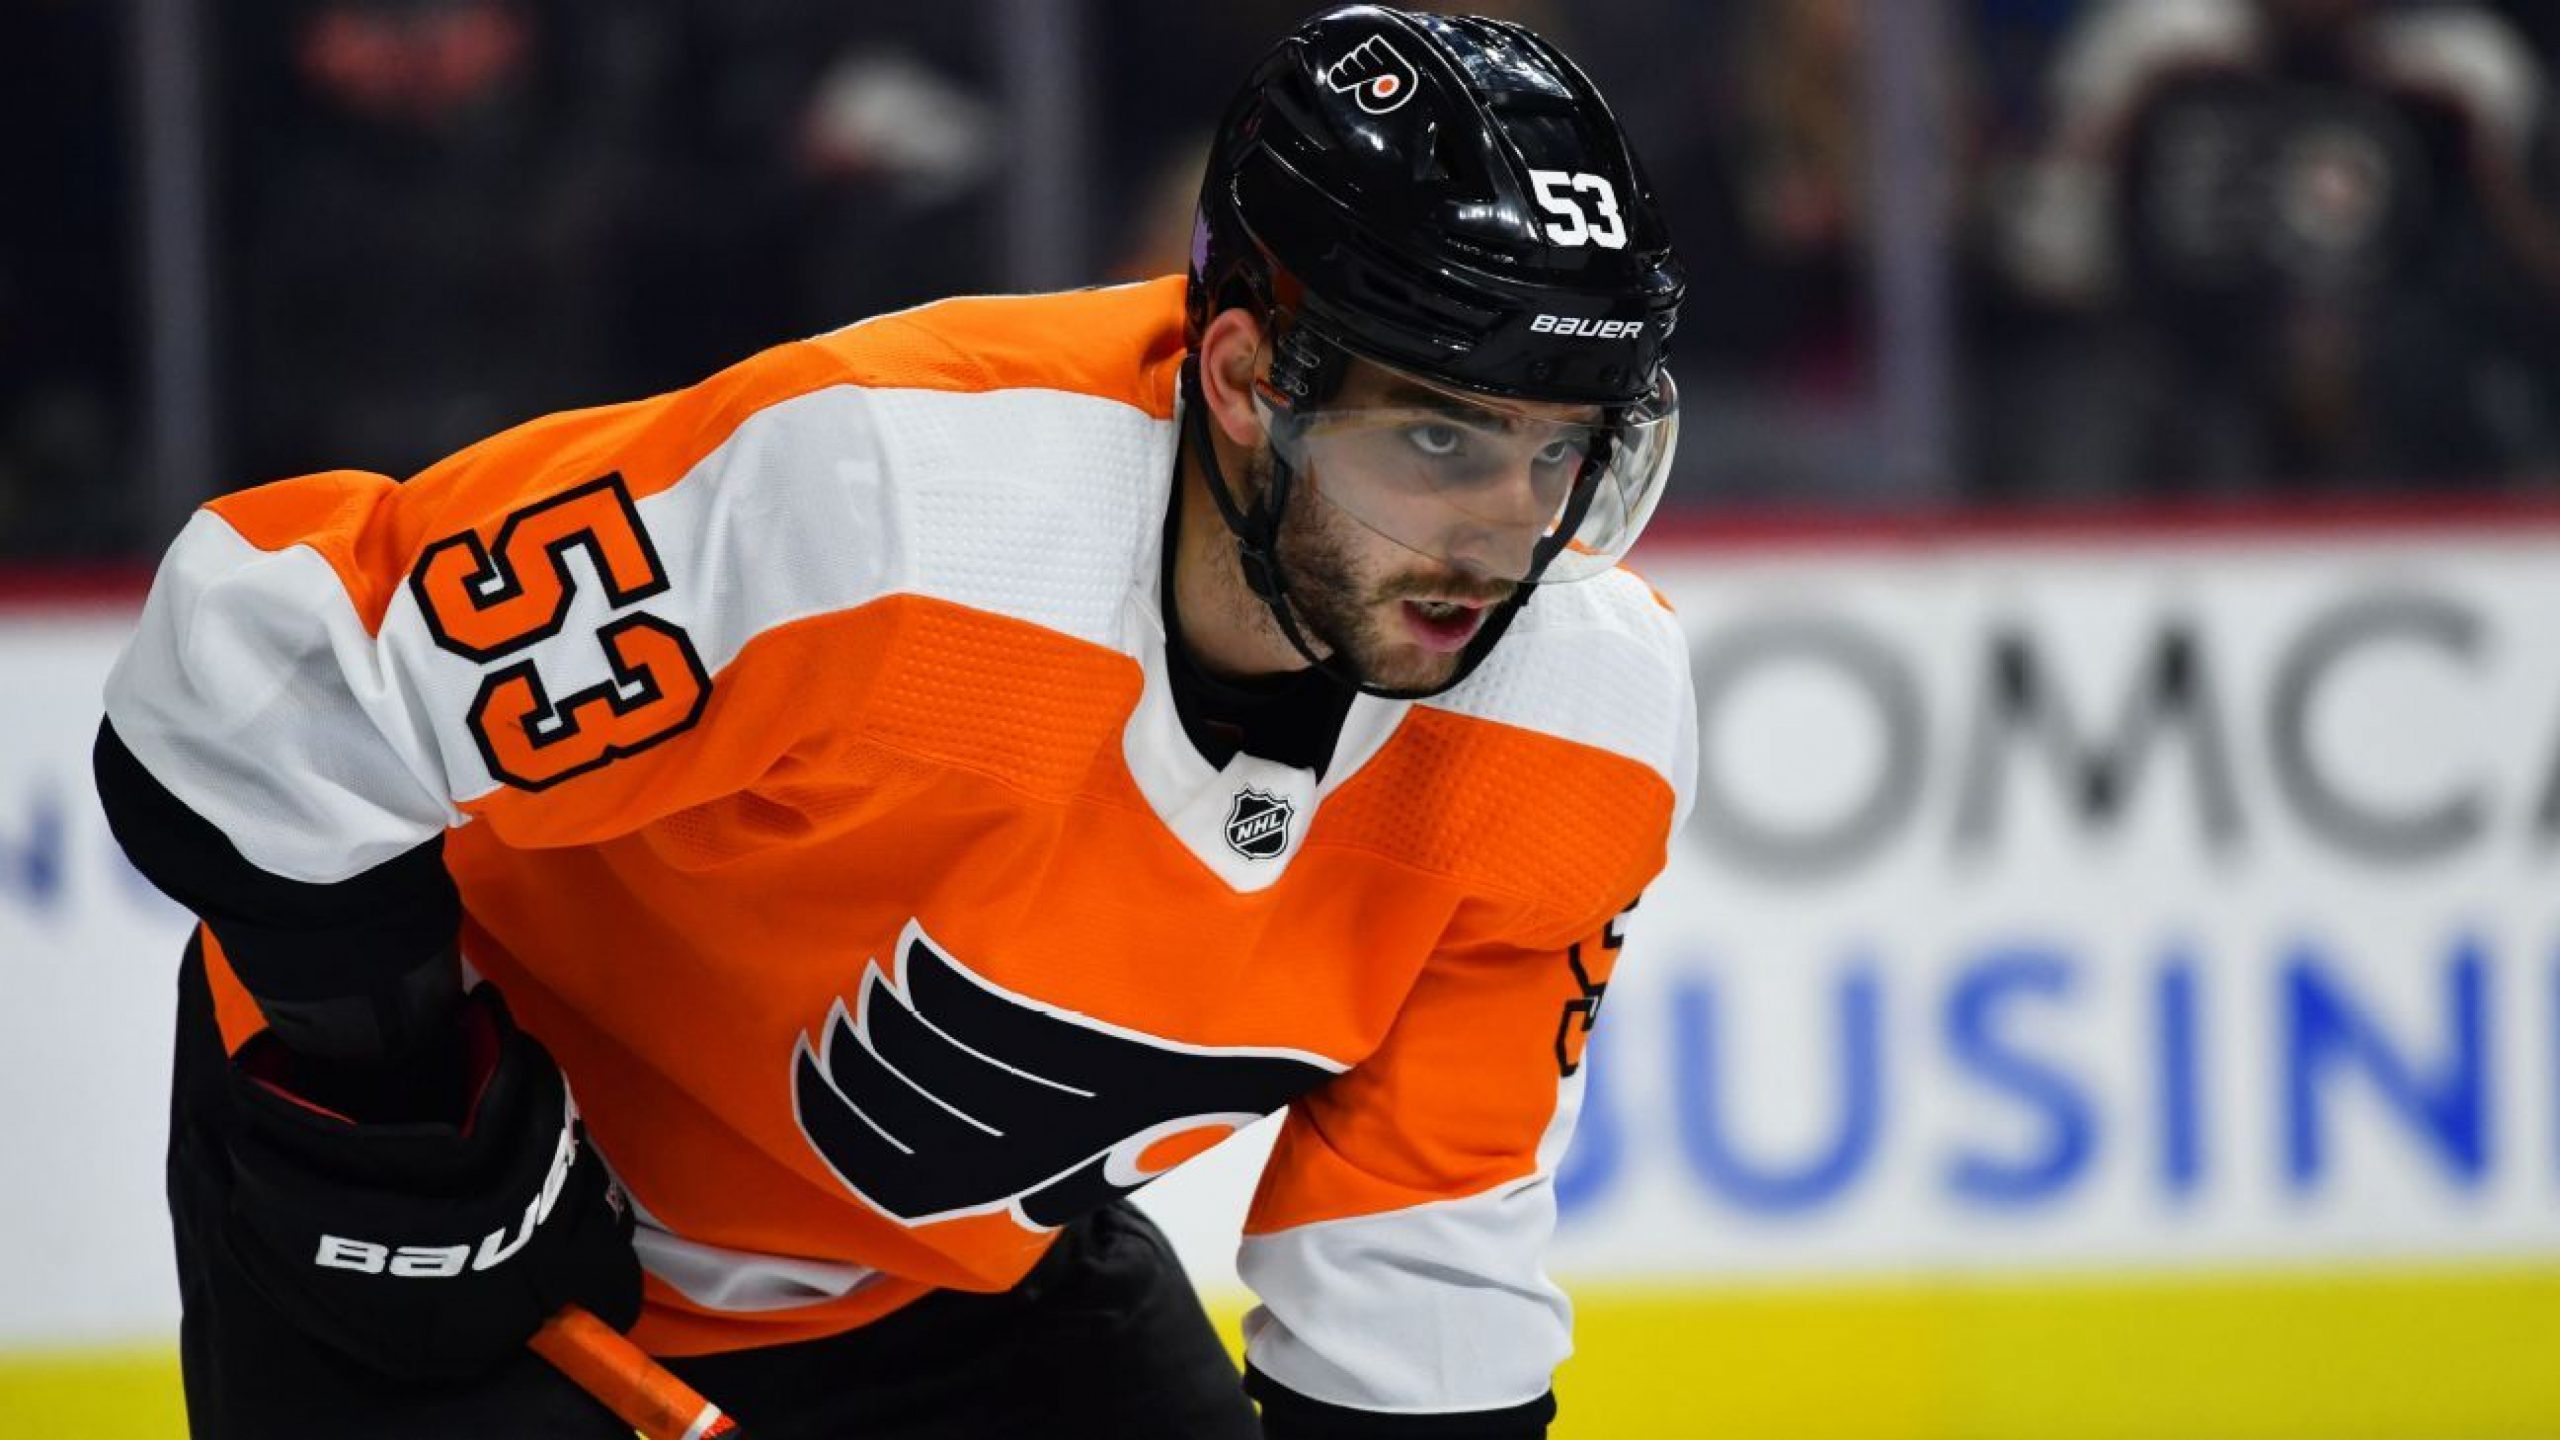 Flyers ‘trade’ Gostisbehere, picks to Coyotes